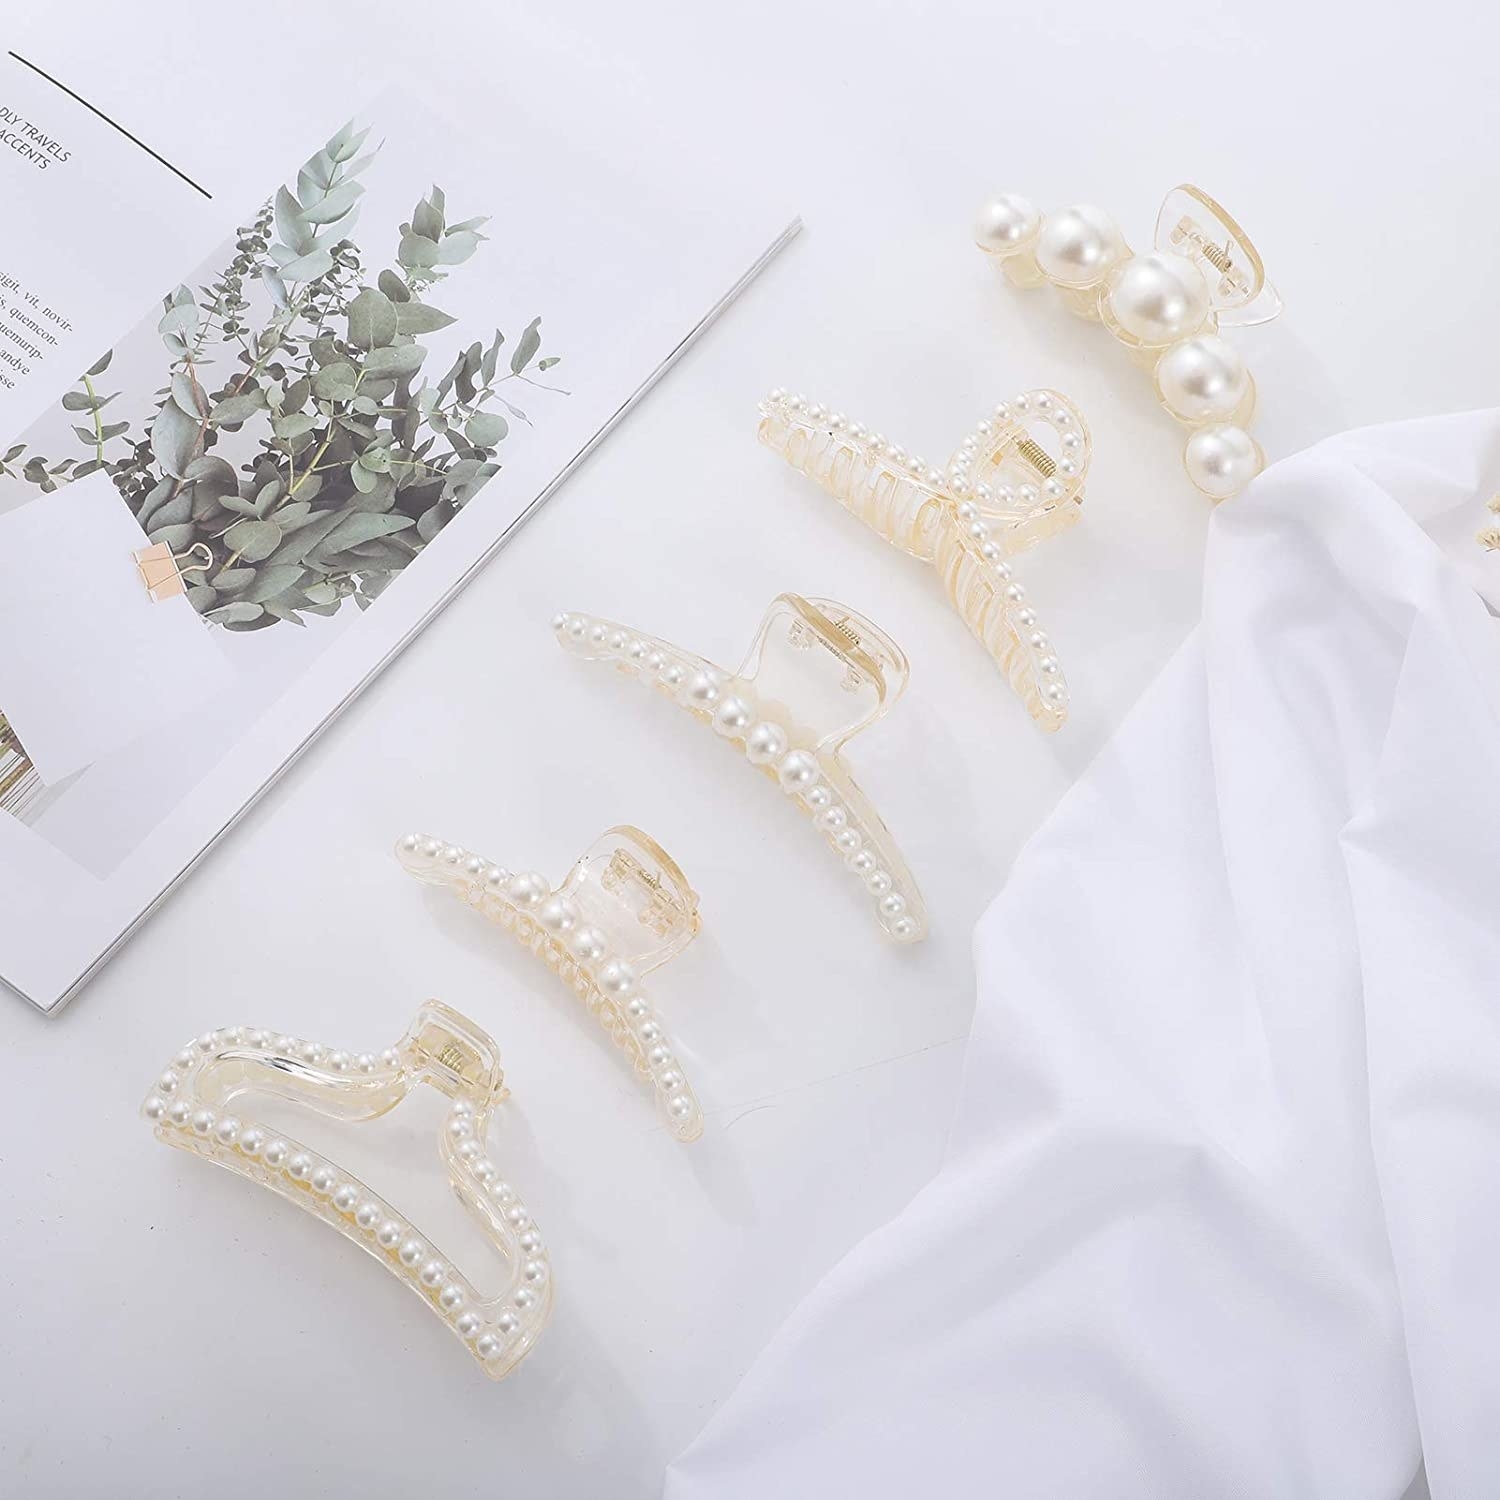 a flatlay of several faux pearl-encrusted hair clips